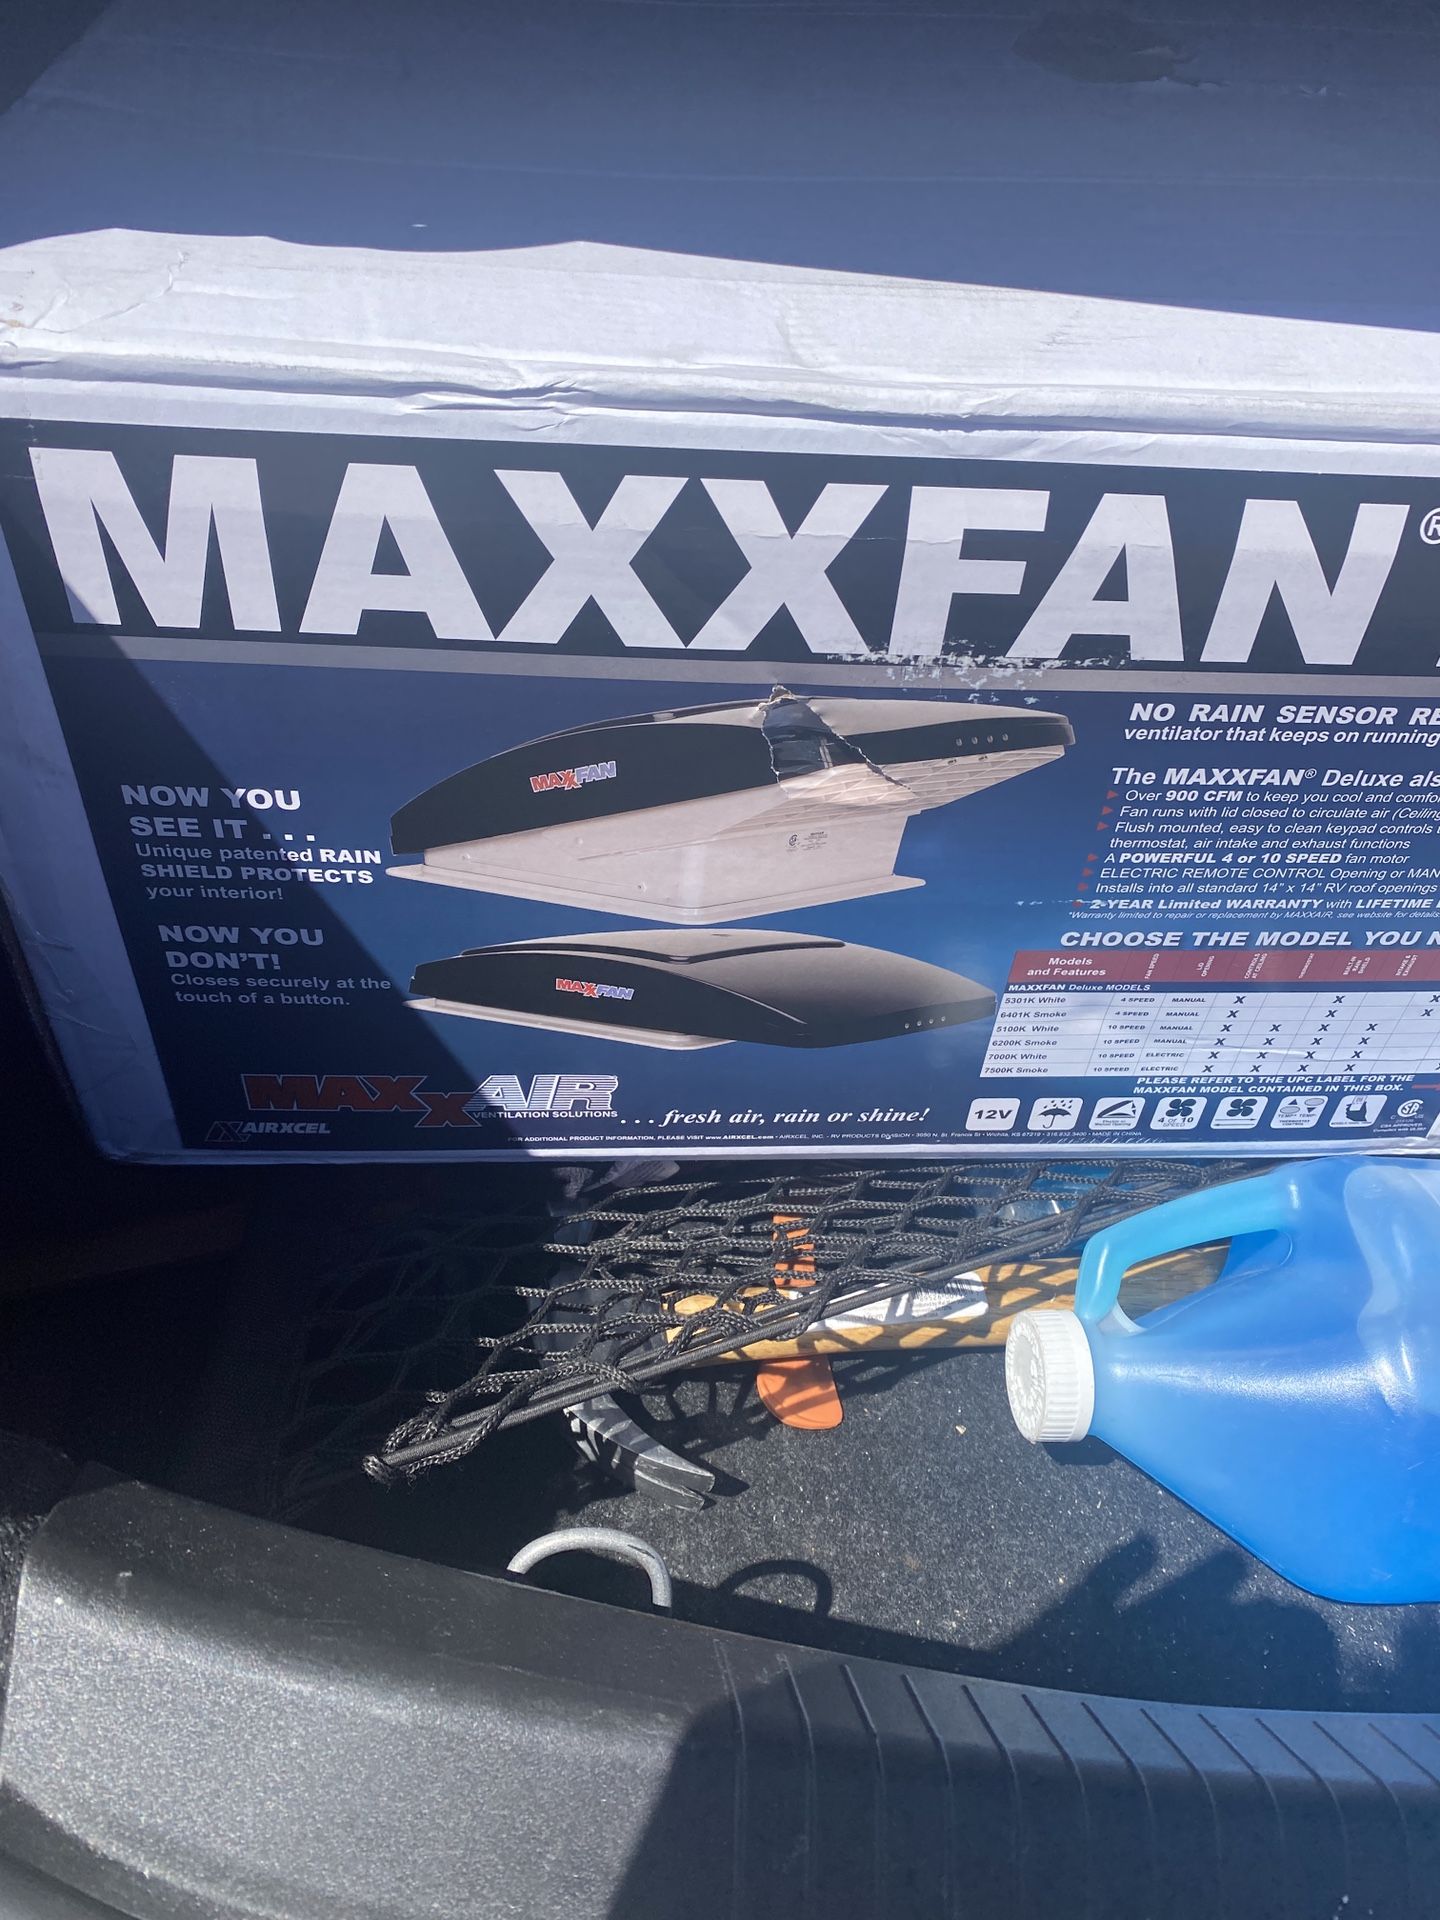 Max fan does all types of things brand new for a rv